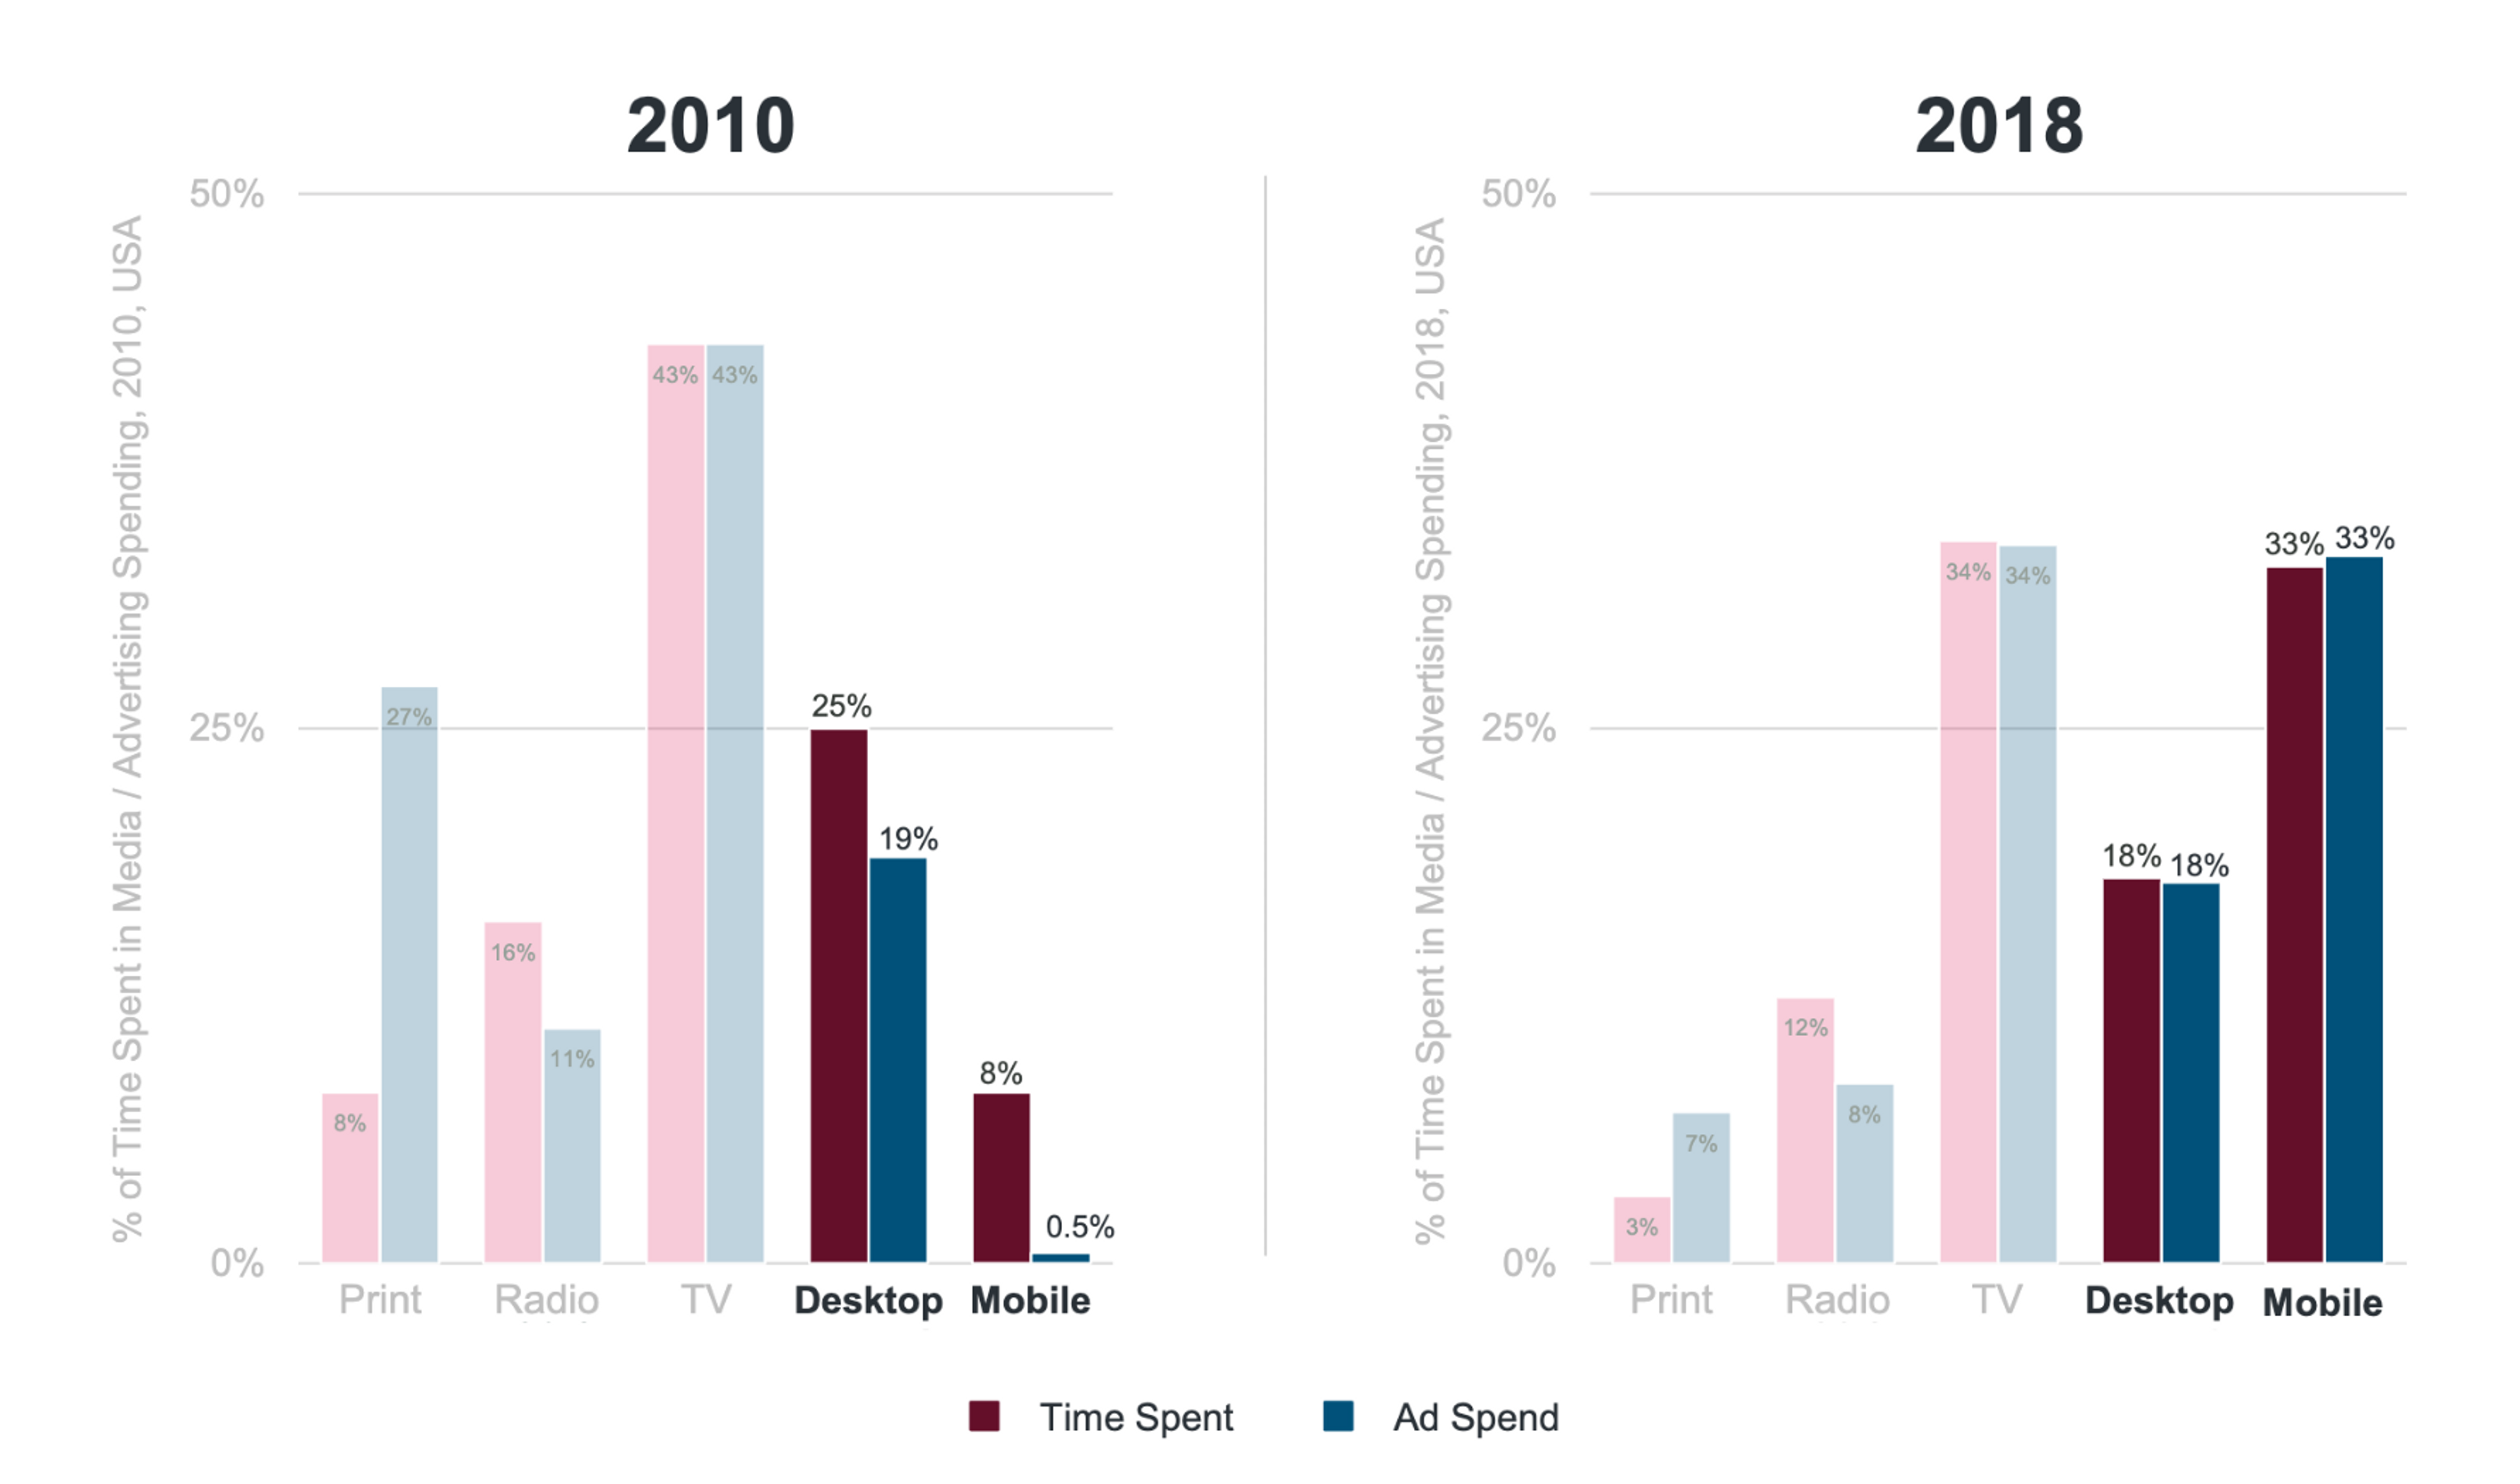 Chart showing how advertising dollars spent on desktop and mobile have caught up to time spent over the last eight years.